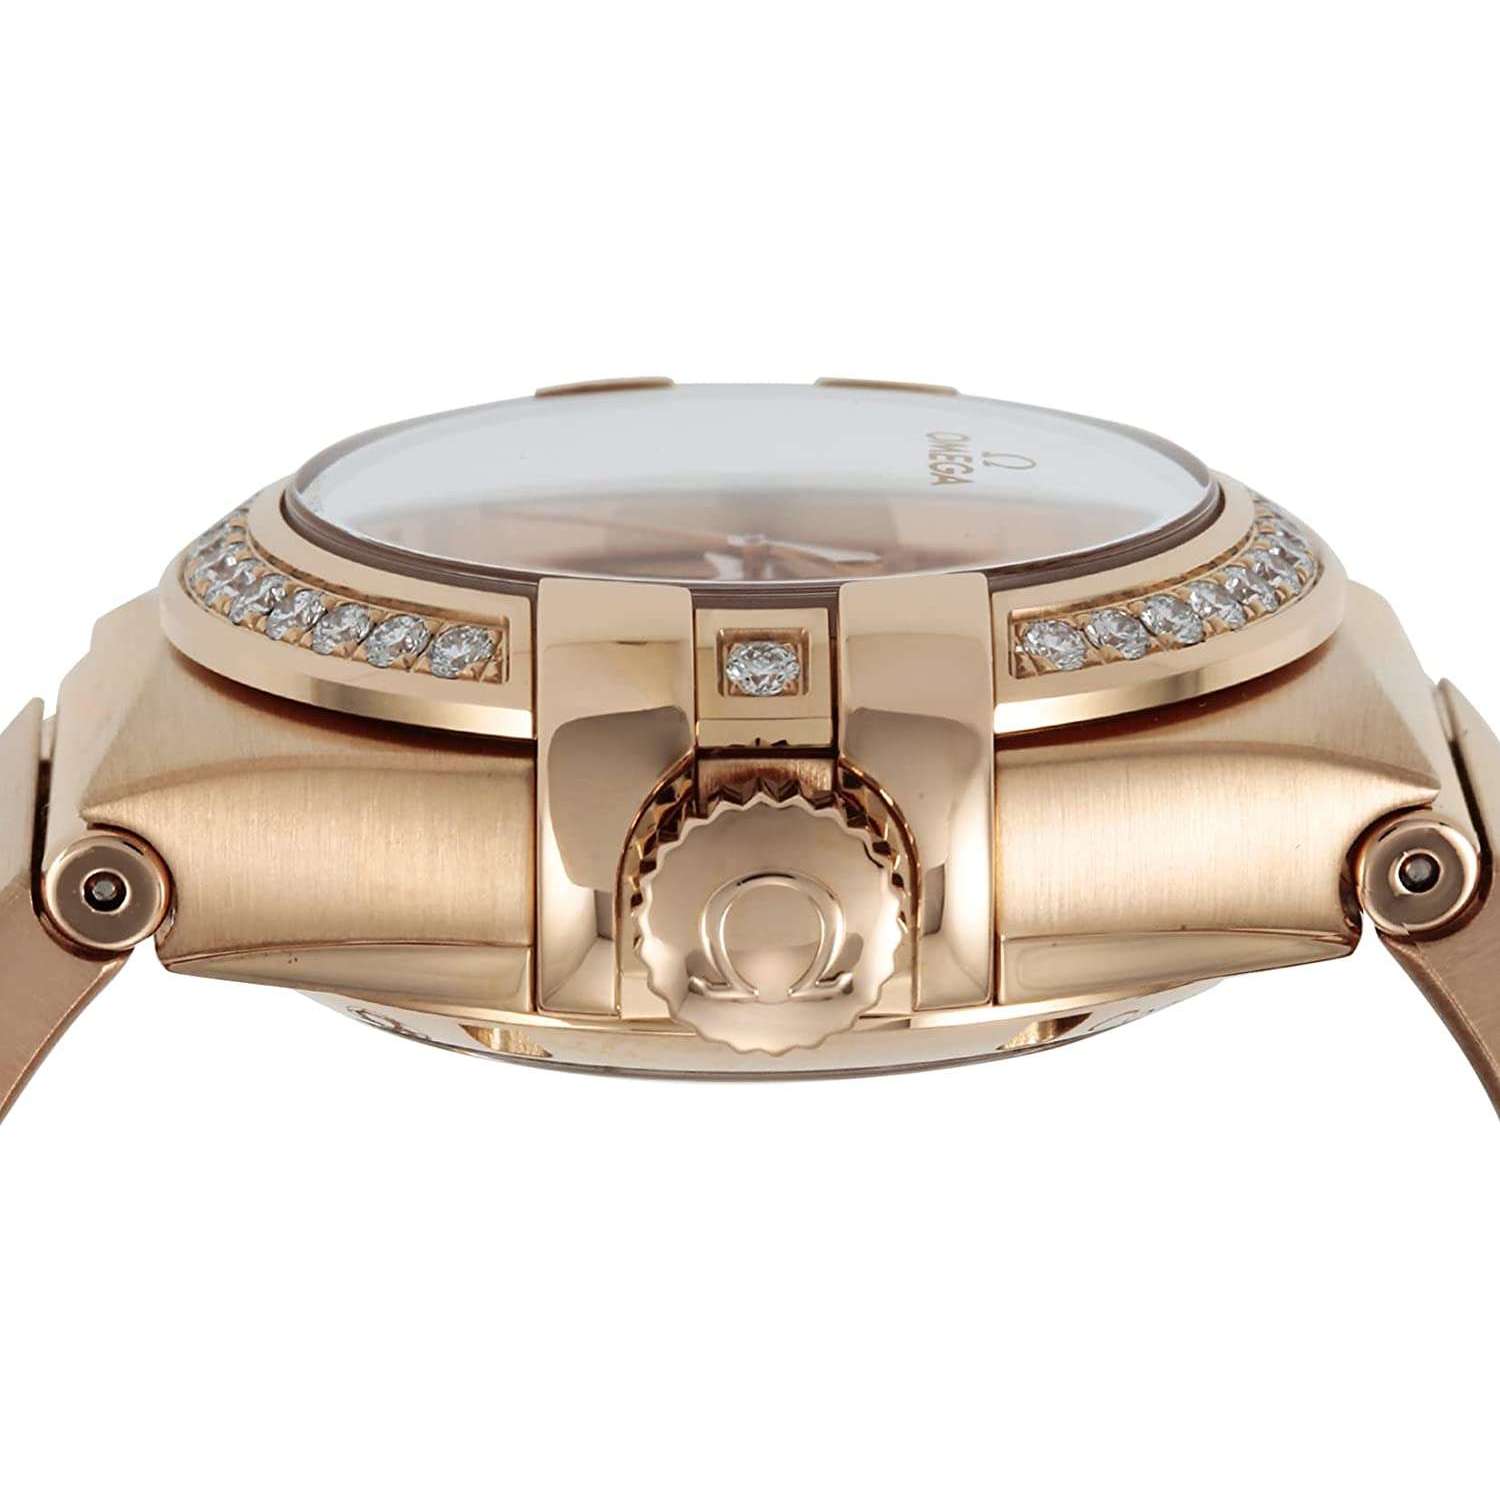 ROOK JAPAN:OMEGA CONSTELLATION CO‑AXIAL CHRONOMETER 27 MM WOMEN WATCH 123.55.27.20.55.005,Luxury Watch,Omega